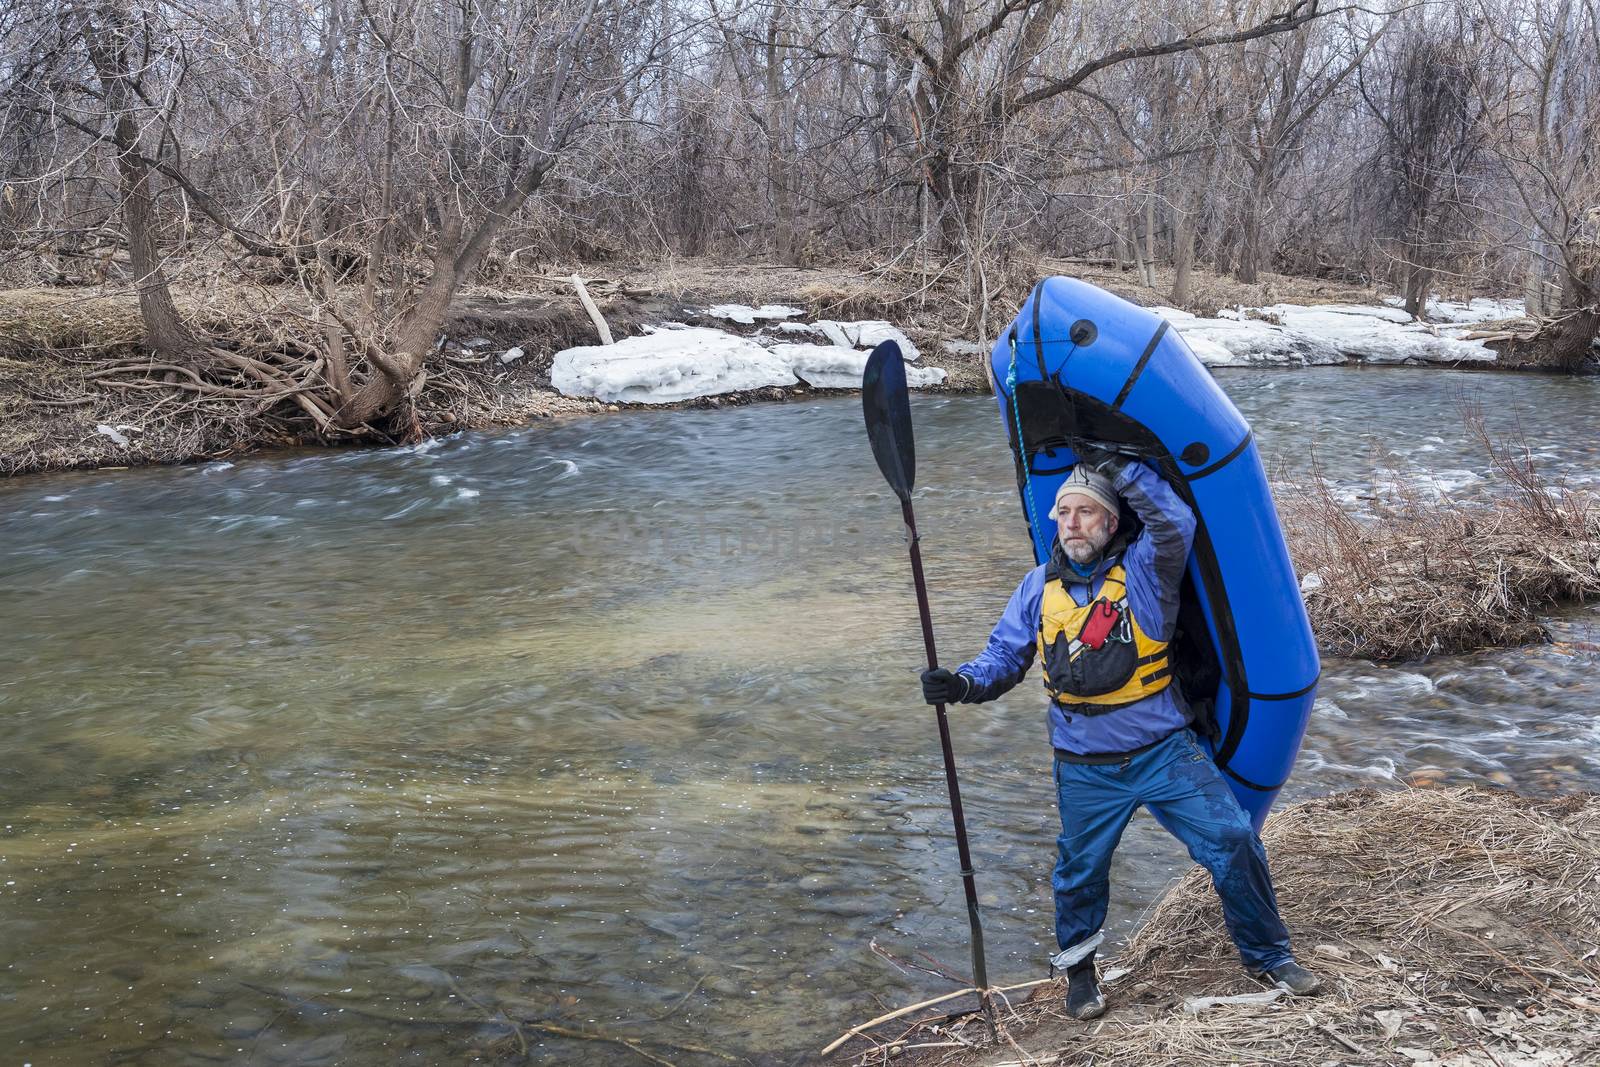 senior male carrying a packraft (one-person light raft used for expedition or adventure racing) on the shore of Cache la Poudre River in Fort Collins, Colorado, winter or early spring scenery